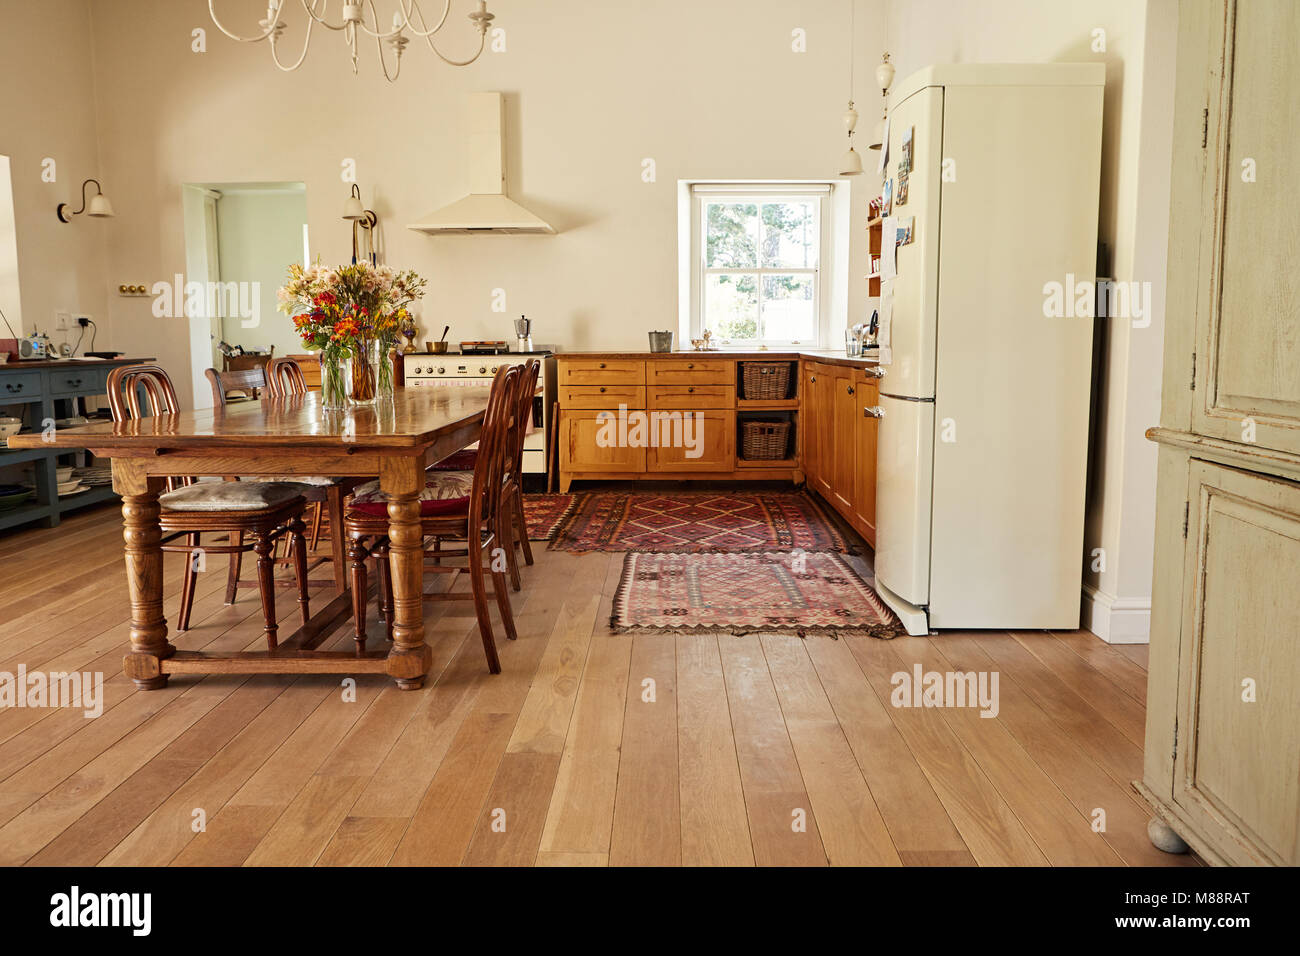 Interior of a country style kitchen in a bright residental home with a dining table, chairs and appliances Stock Photo